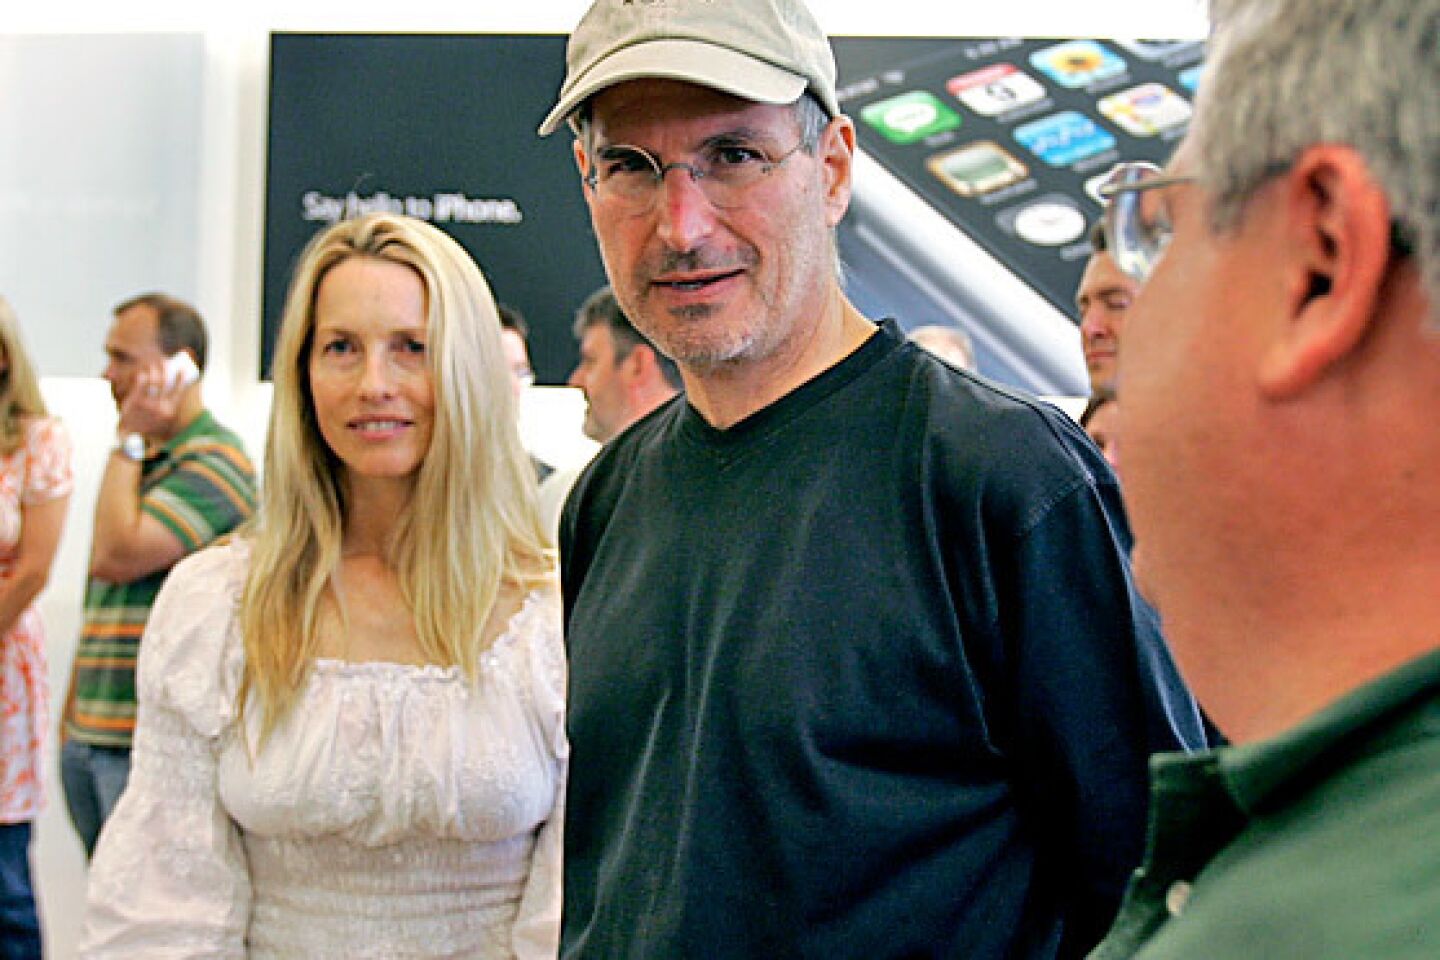 Jobs and his wife, Laurene Powell, meet with customers after the launch of the iPhone.